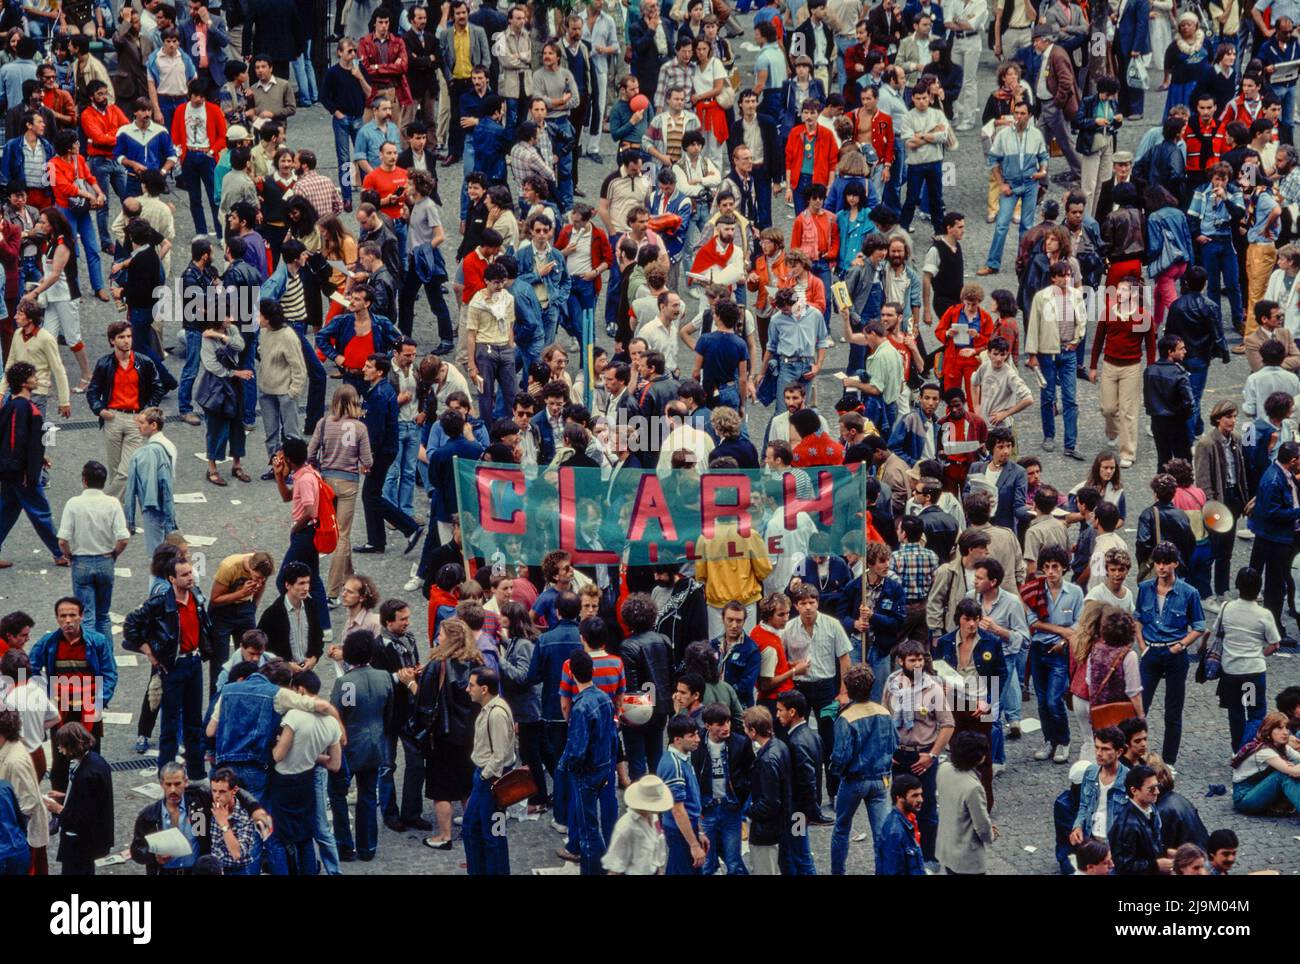 Paris, France, High Angle, Large Crowd of People in Street, LGBT Fierté, Gay Pride March, 1982, 1980s France, gay protest vintage Stock Photo